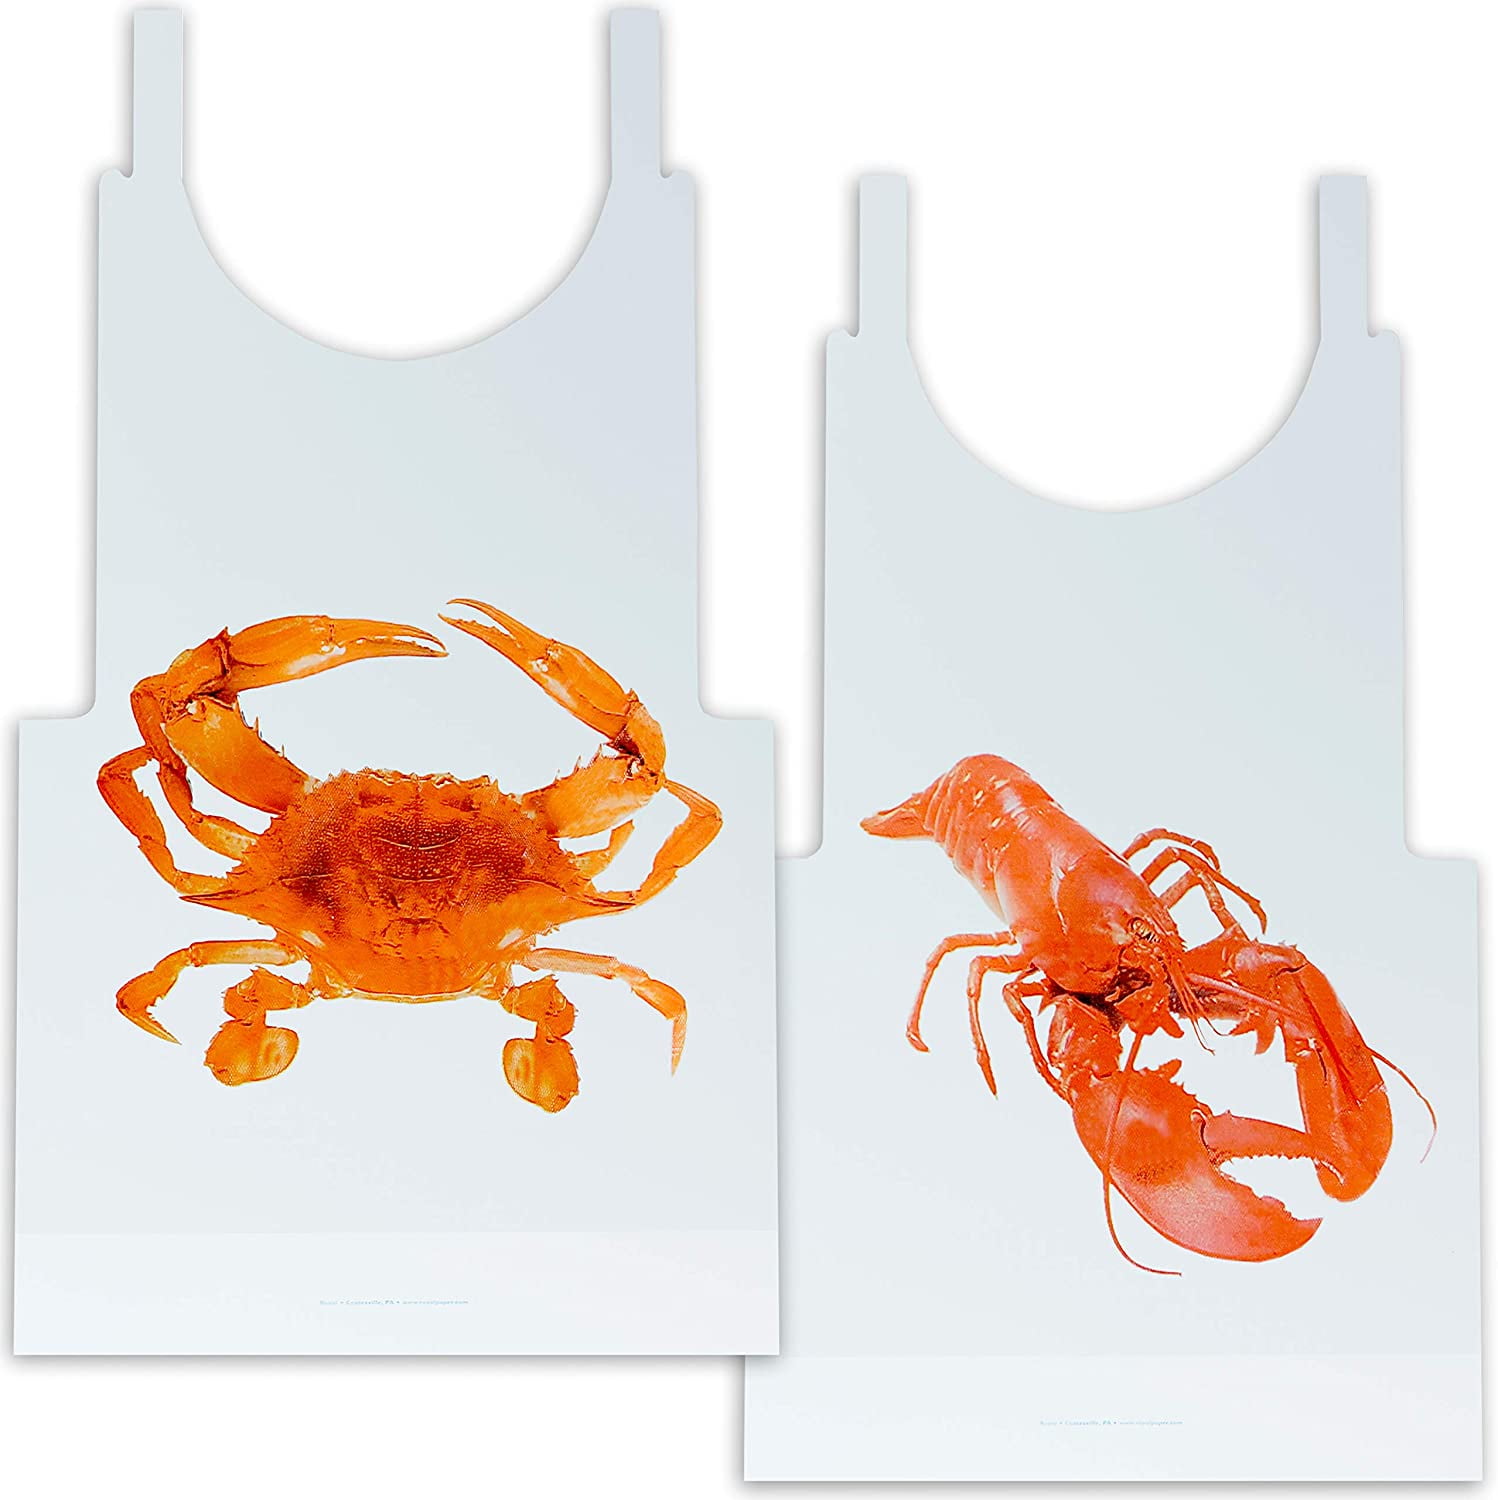 Chuarry 600 Pcs Lobster Bibs Crab Bibs Seafood Boil Party Supplies Include  200 Adult Crawfish Bibs 200 Wet Wipe Bundle Moist Towelettes 200 Pairs